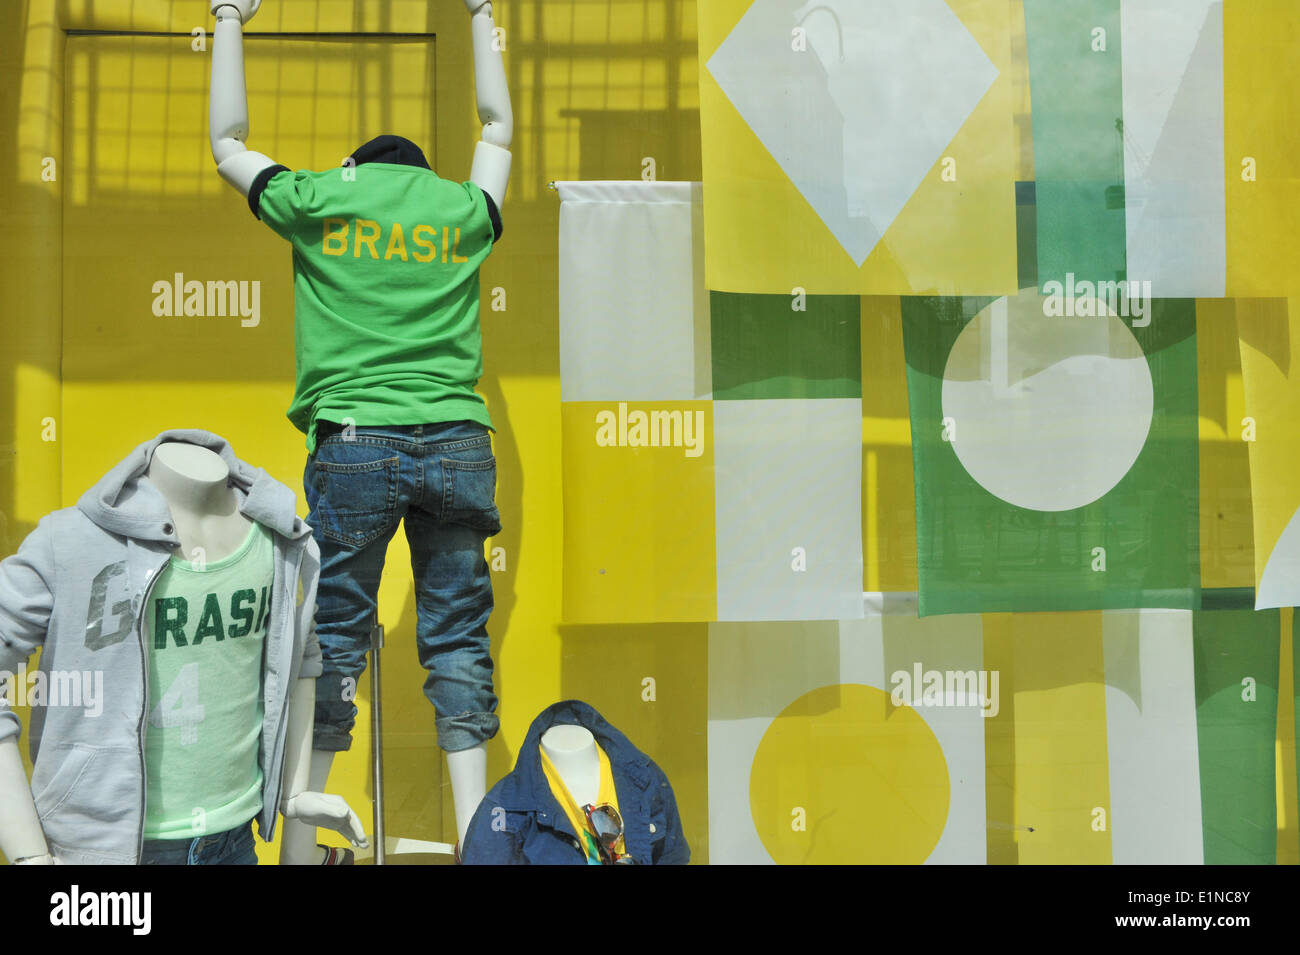 Oxford Street, London, UK. 7th June 2014. GAP Kids window with Brazil flags and T Shirts, ahead of the World Cup. Credit:  Matthew Chattle/Alamy Live News Stock Photo